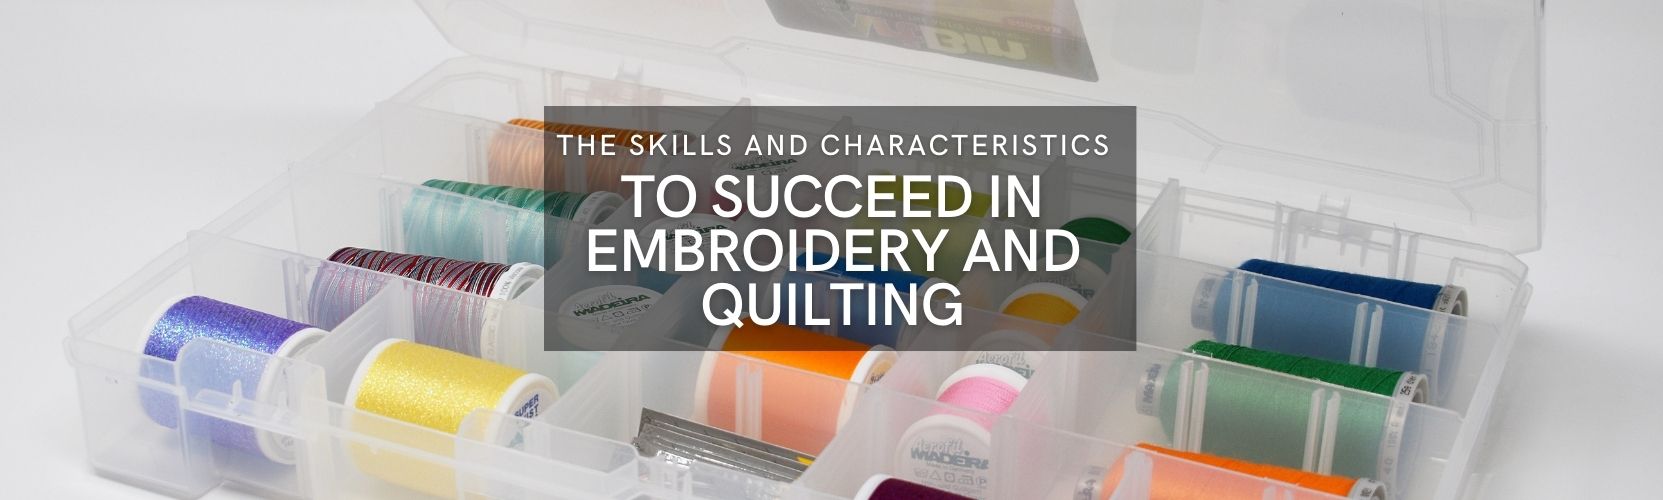 The Key Skills and Characteristics of a Proficient Embroiderer and Quilter